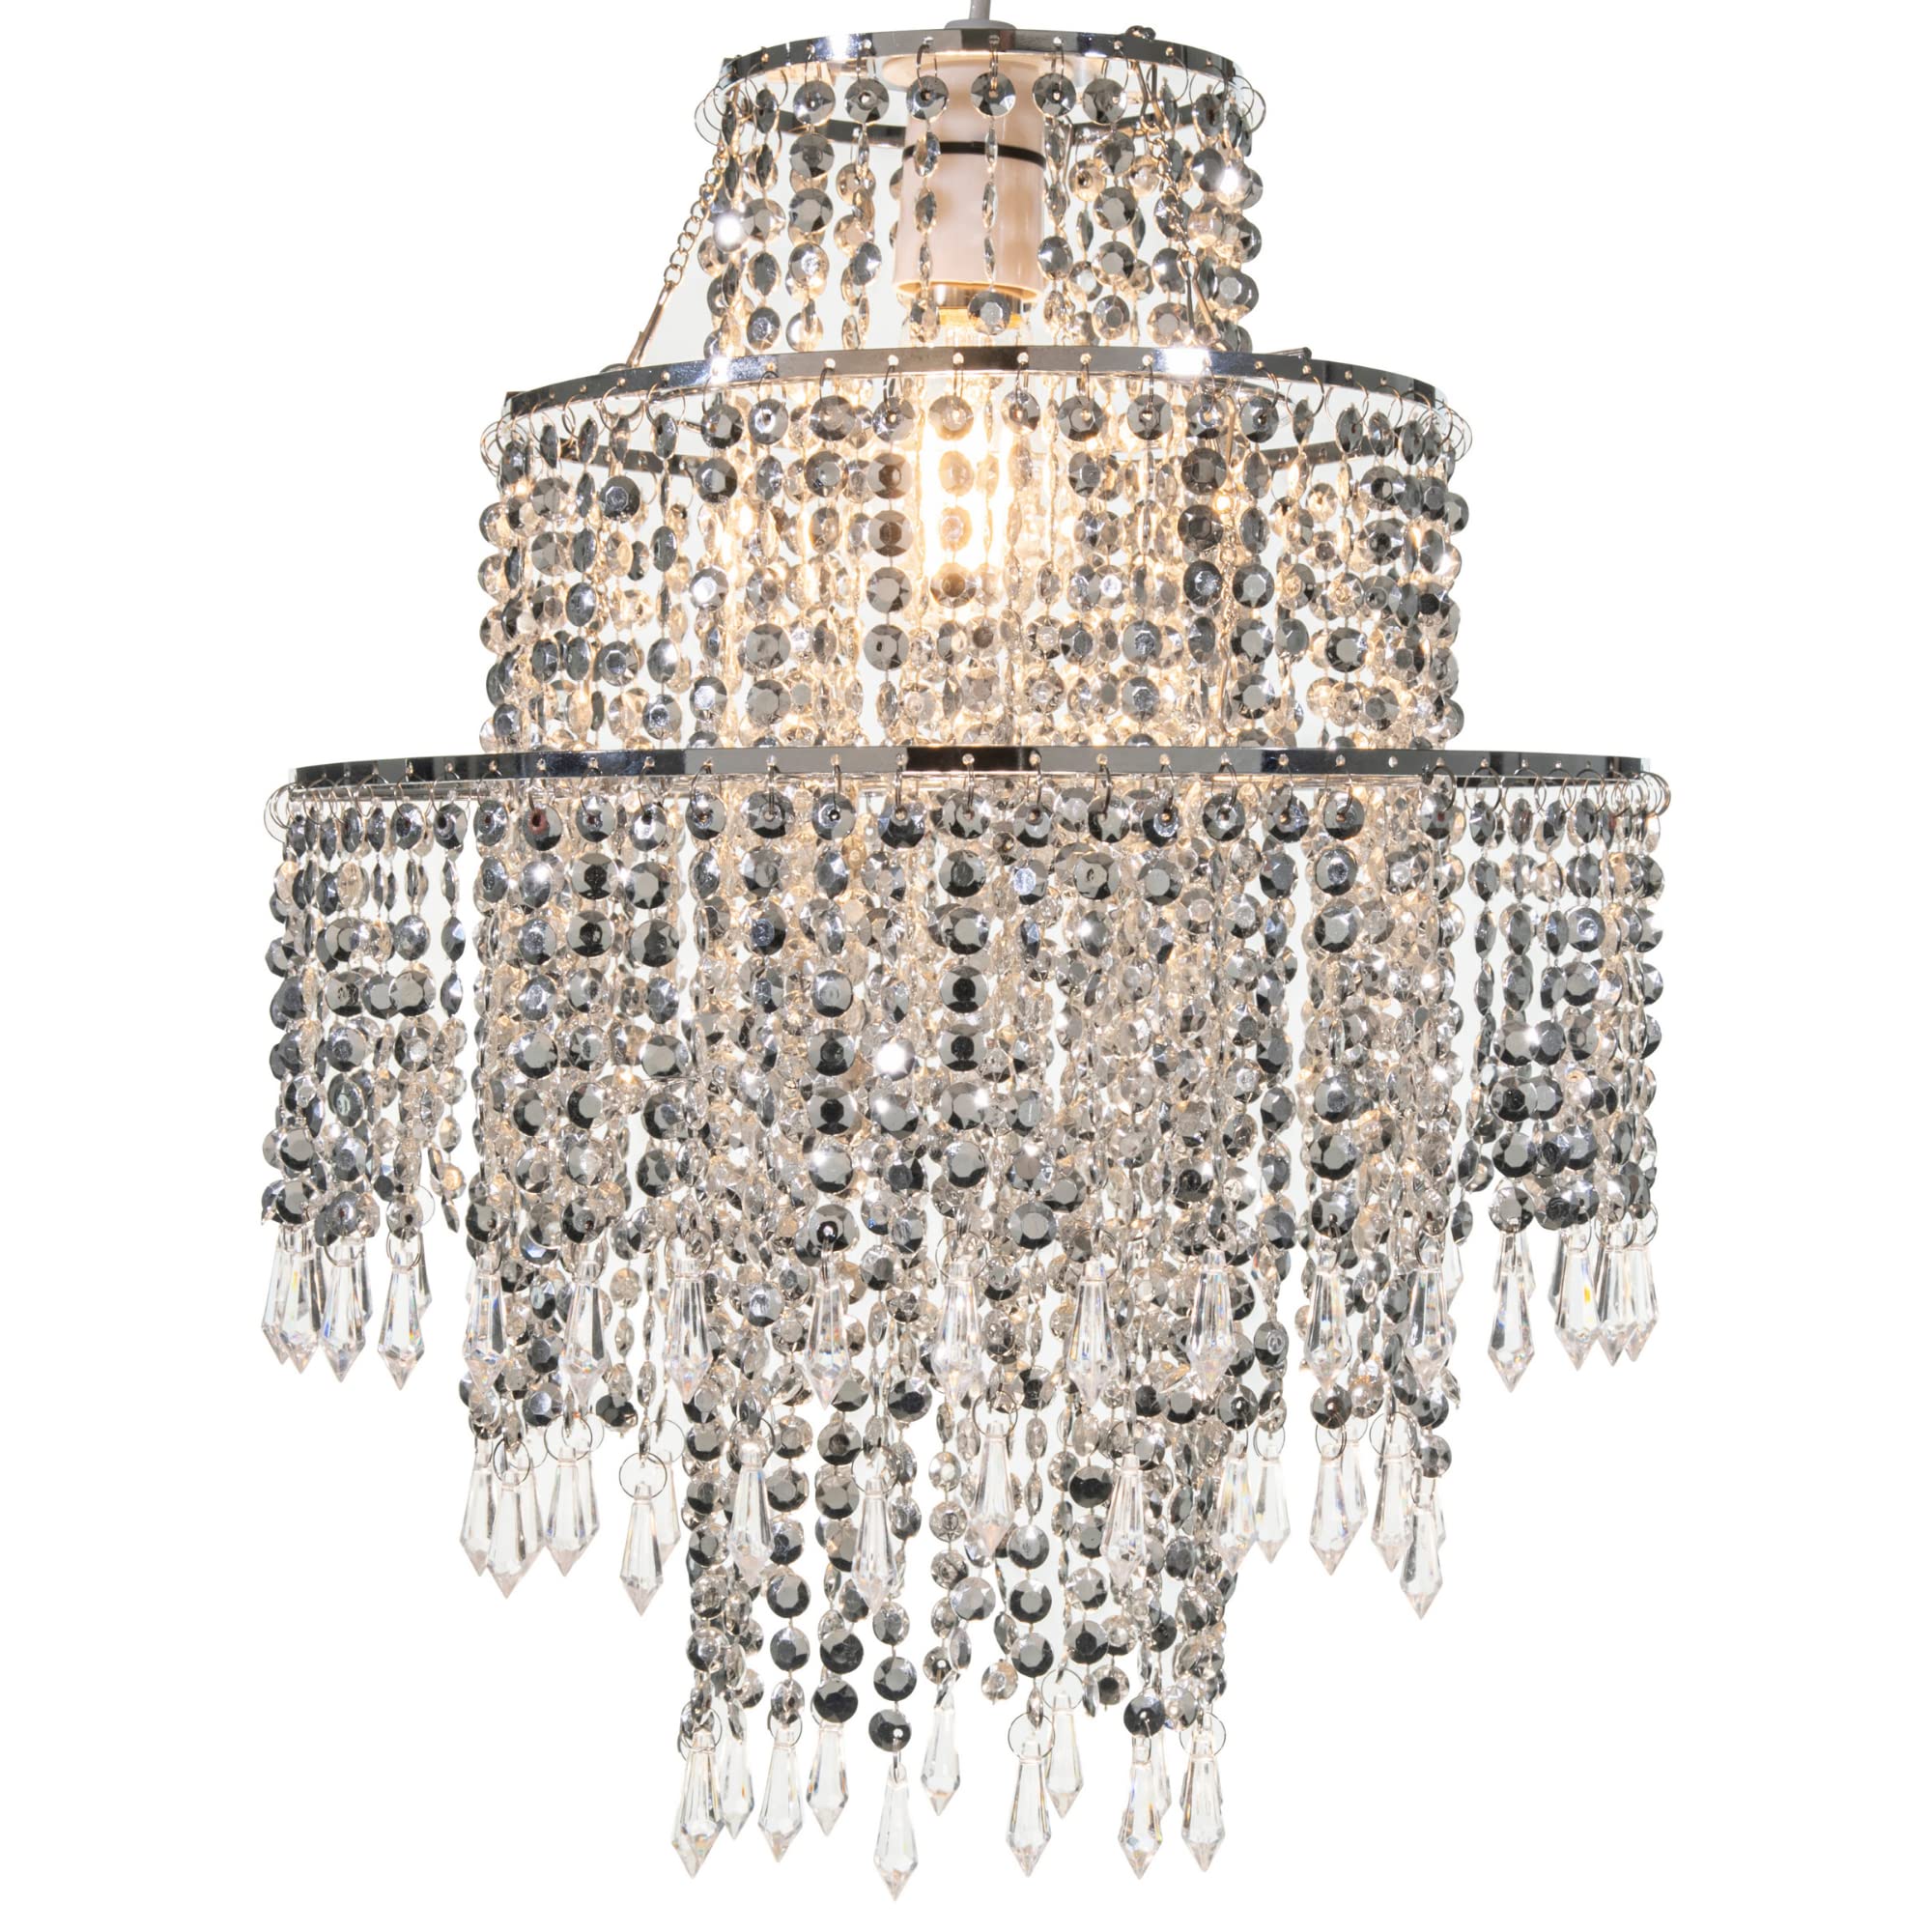 Giggi 3-Tier Silver Chandelier Light Shade | Lamp Shade for Pendant Light Ceiling Light Shade Acrylic Crystal Chandelier Easy Fit Lampshades for Ceiling Lights for Living Room Bedroom Kitchen Hallway